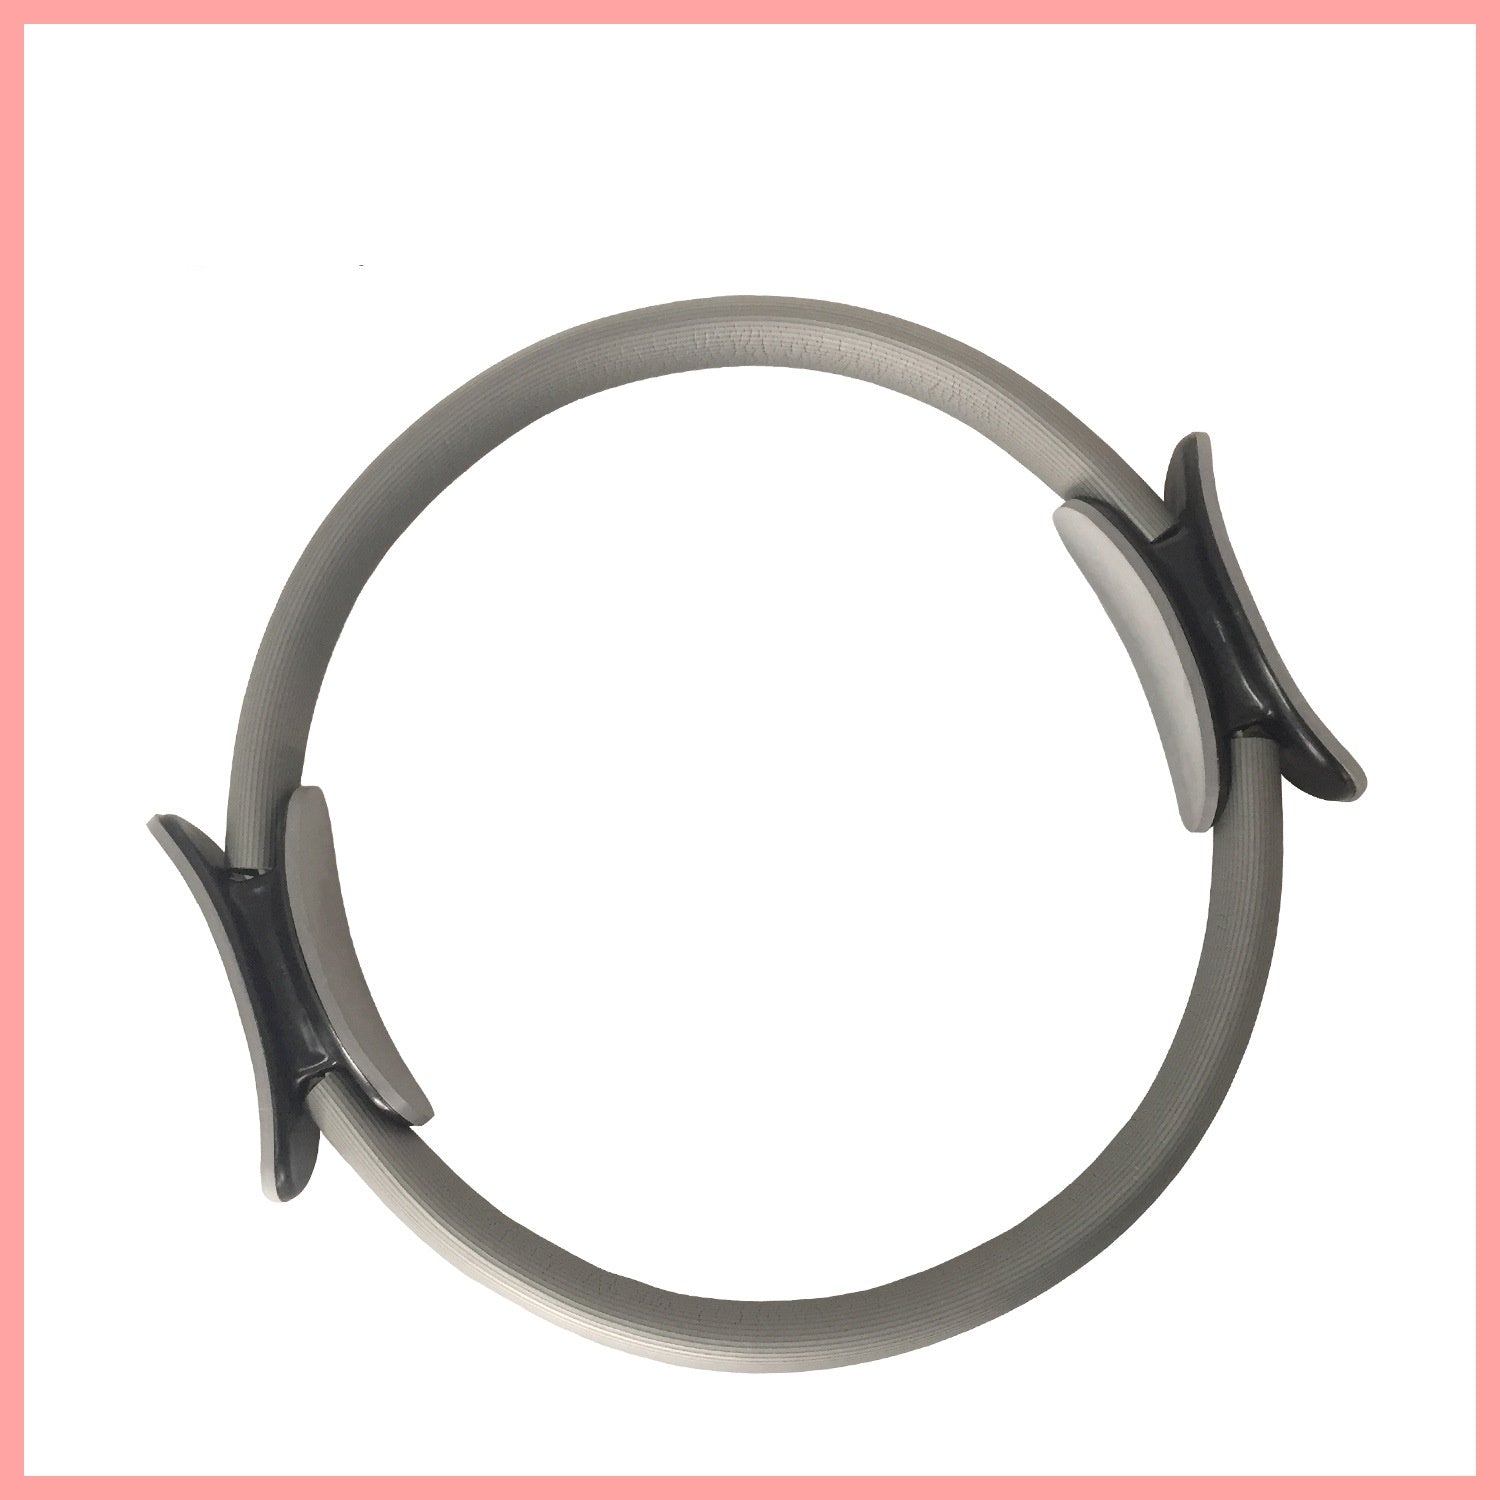 Dynamic Pilates Ring | Sculpt, Strengthen, and Enhance Anywhere!